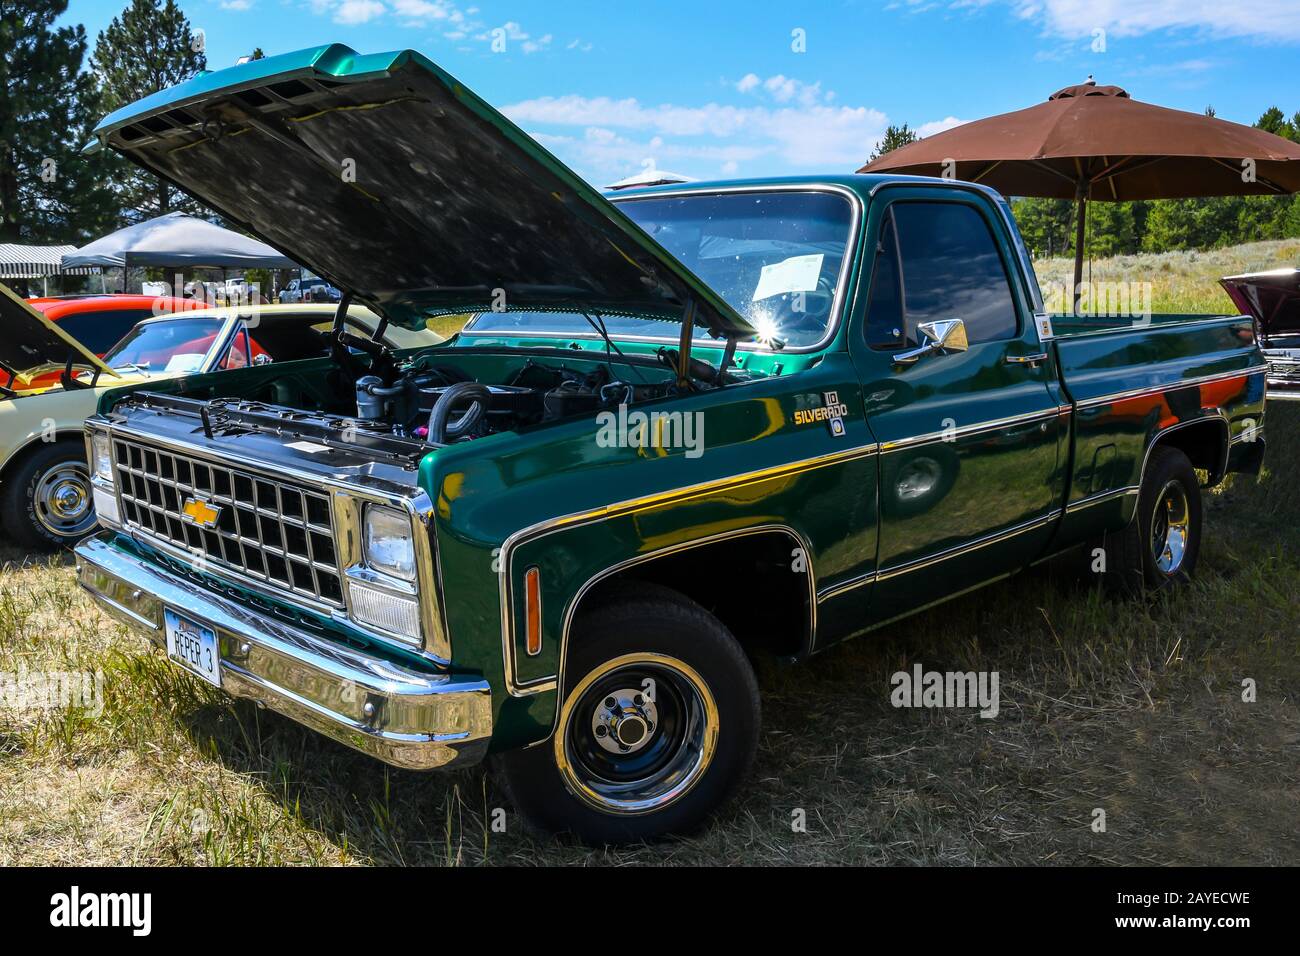 A large outdoor Rev Mountain Car and Bike Show in Lincoln, Montana Stock Photo